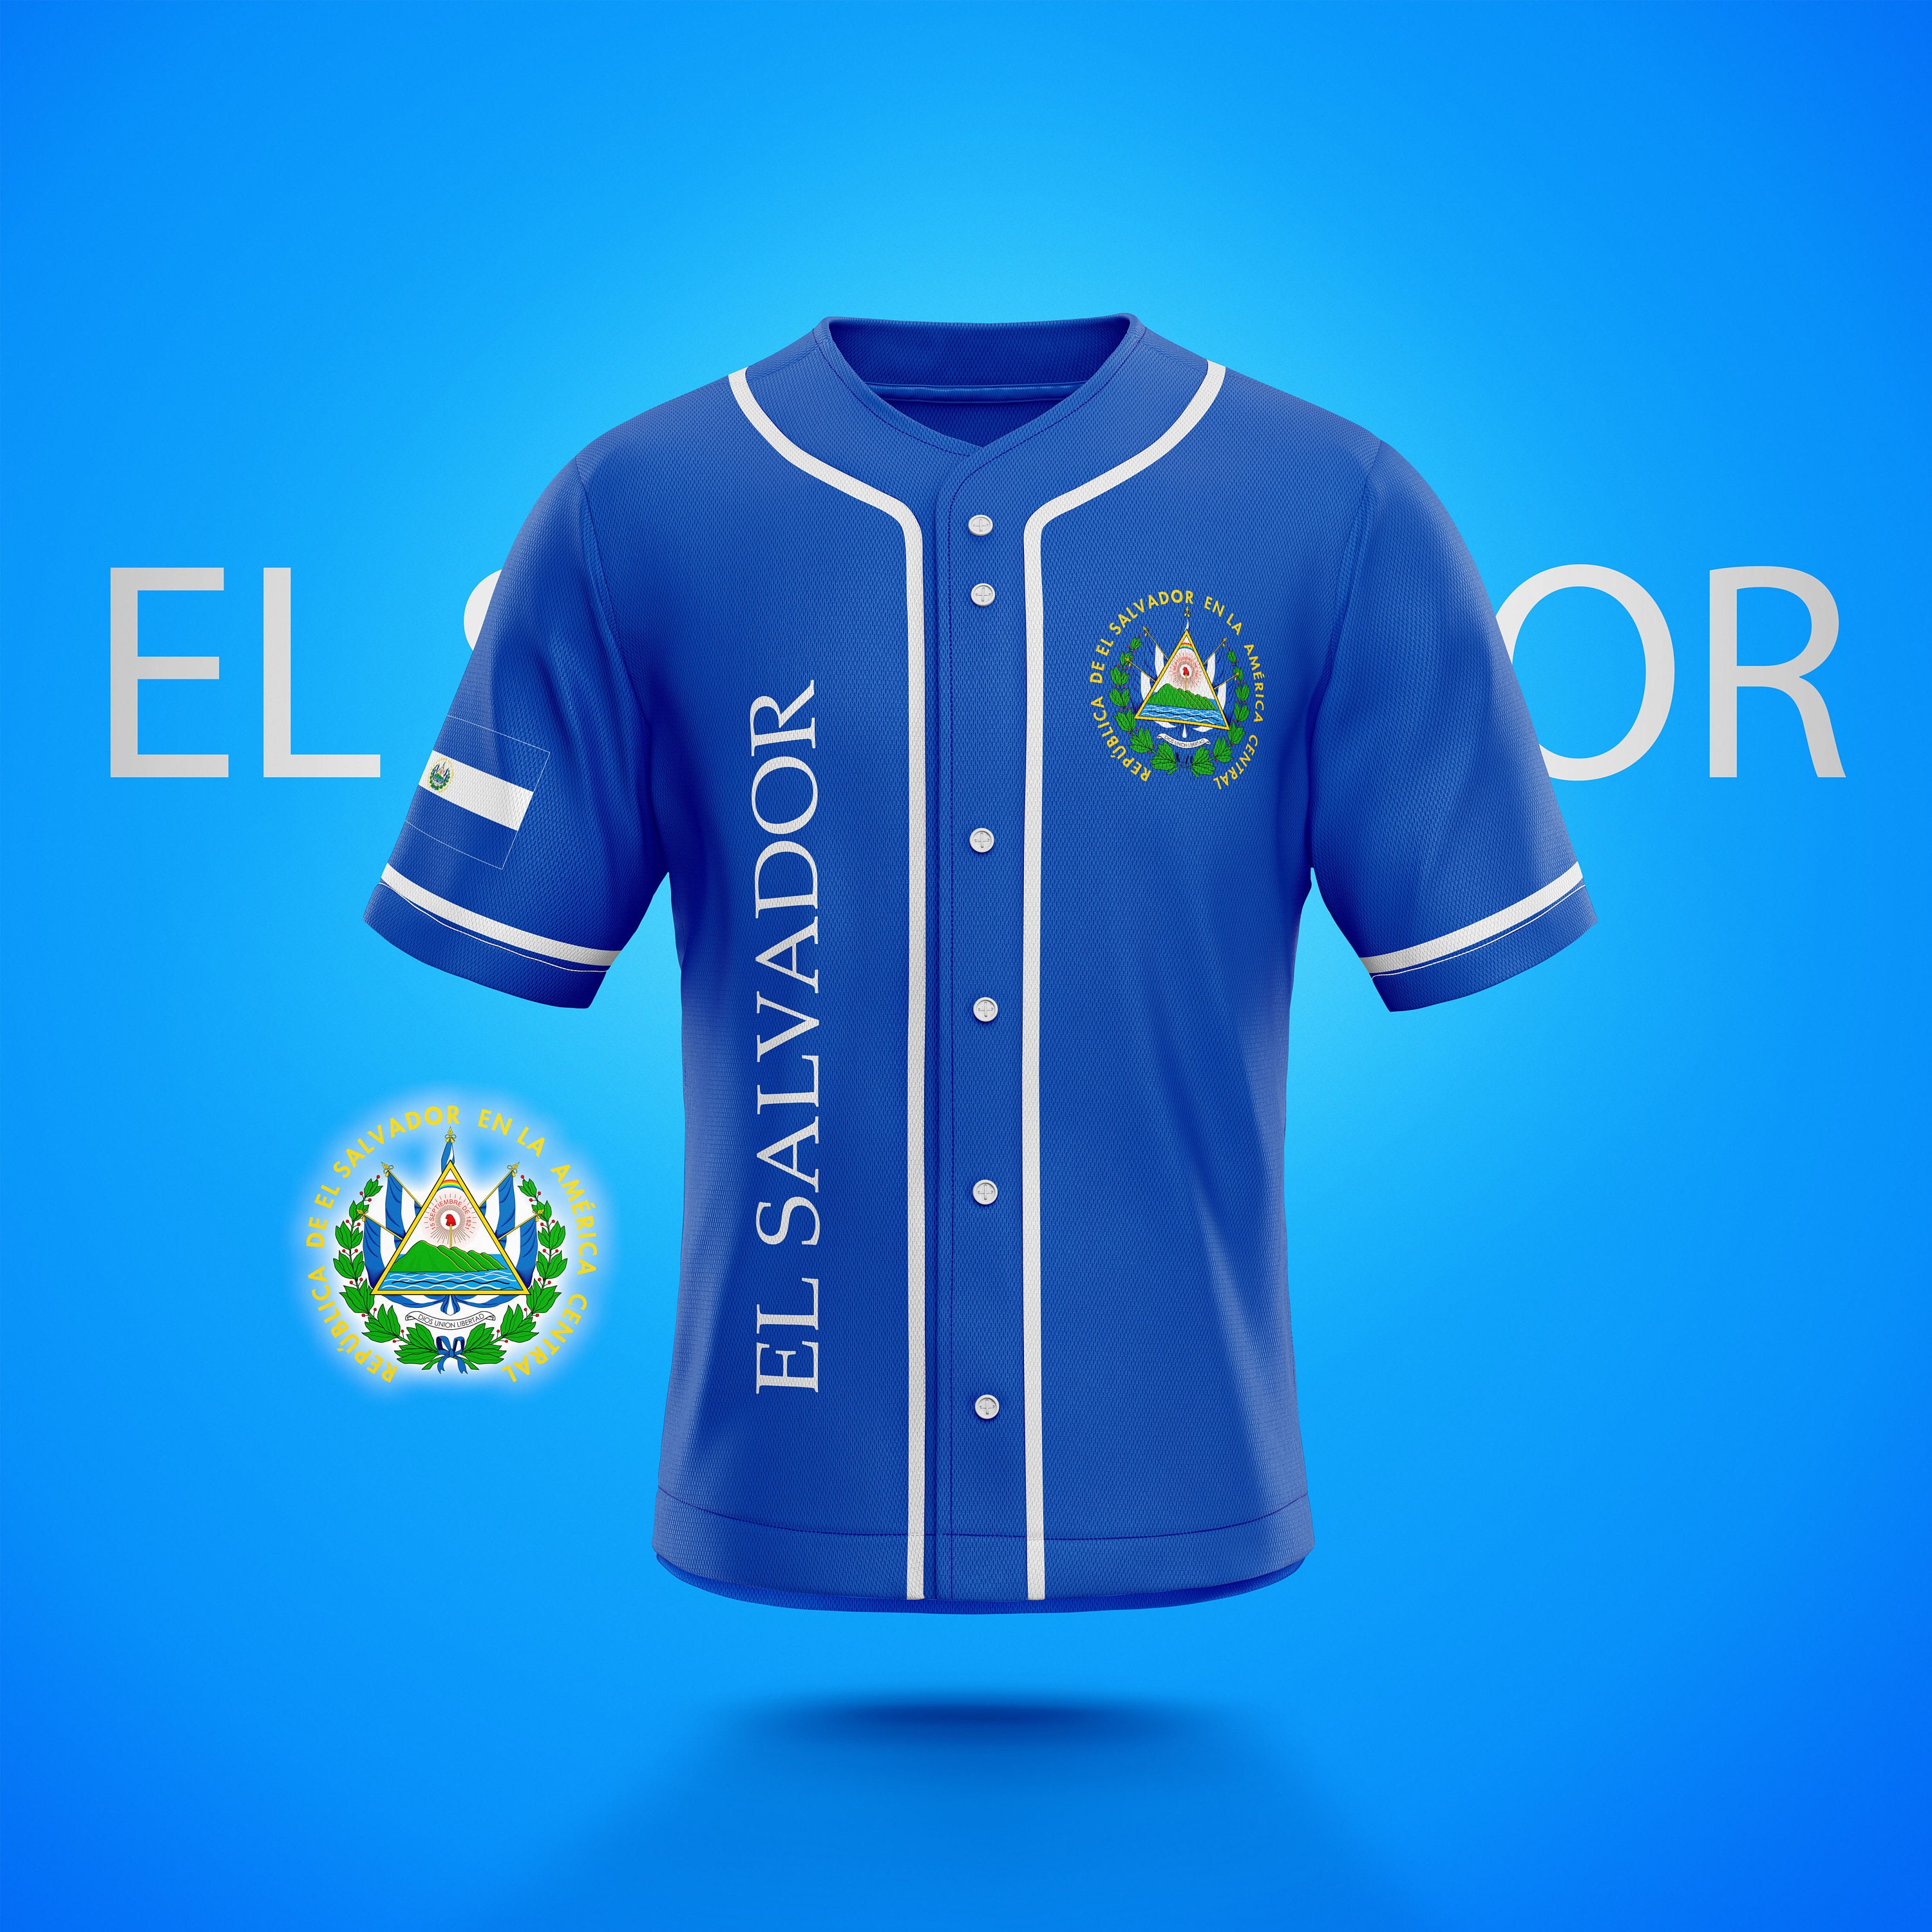  El Salvador Country Baseball Jersey, El Salvador Flag Shirt,  Salvadorans Pride Jersey, El Salvadoreña Jersey (Multi 1) : Clothing, Shoes  & Jewelry